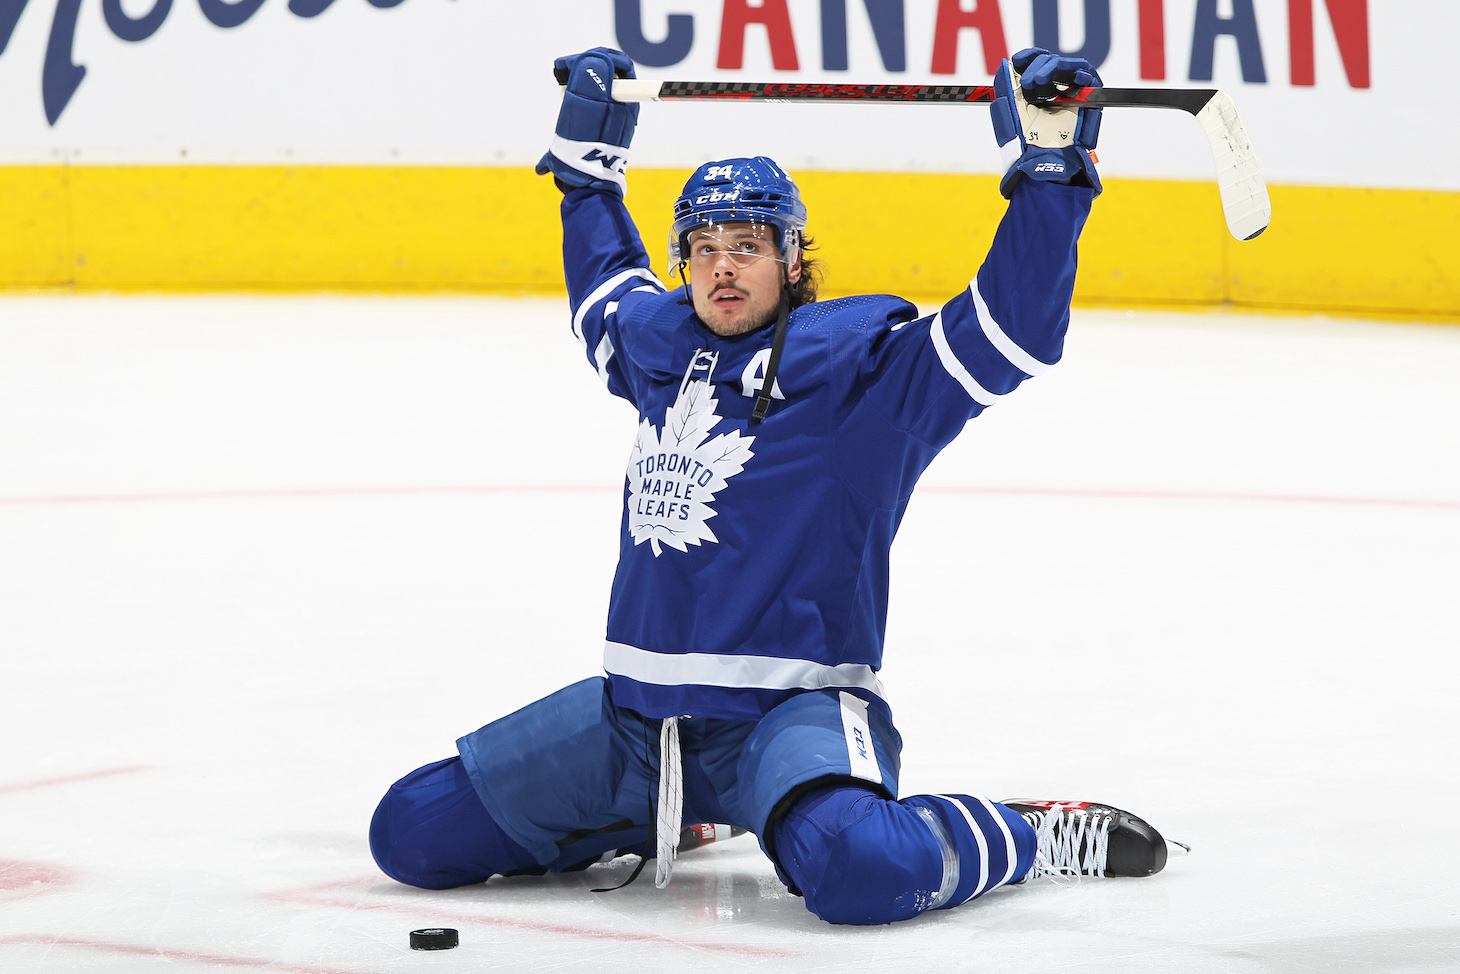 TORONTO, ON - FEBRUARY 22: Auston Matthews #34 of the Toronto Maple Leafs stretches during the warm-up prior to playing against the Calgary Flames in an NHL game at Scotiabank Arena on February 22, 2021 in Toronto, Ontario, Canada. The Flames defeated the Maple Leafs 3-0. (Photo by Claus Andersen/Getty Images) *** Local Caption *** Auston Matthews